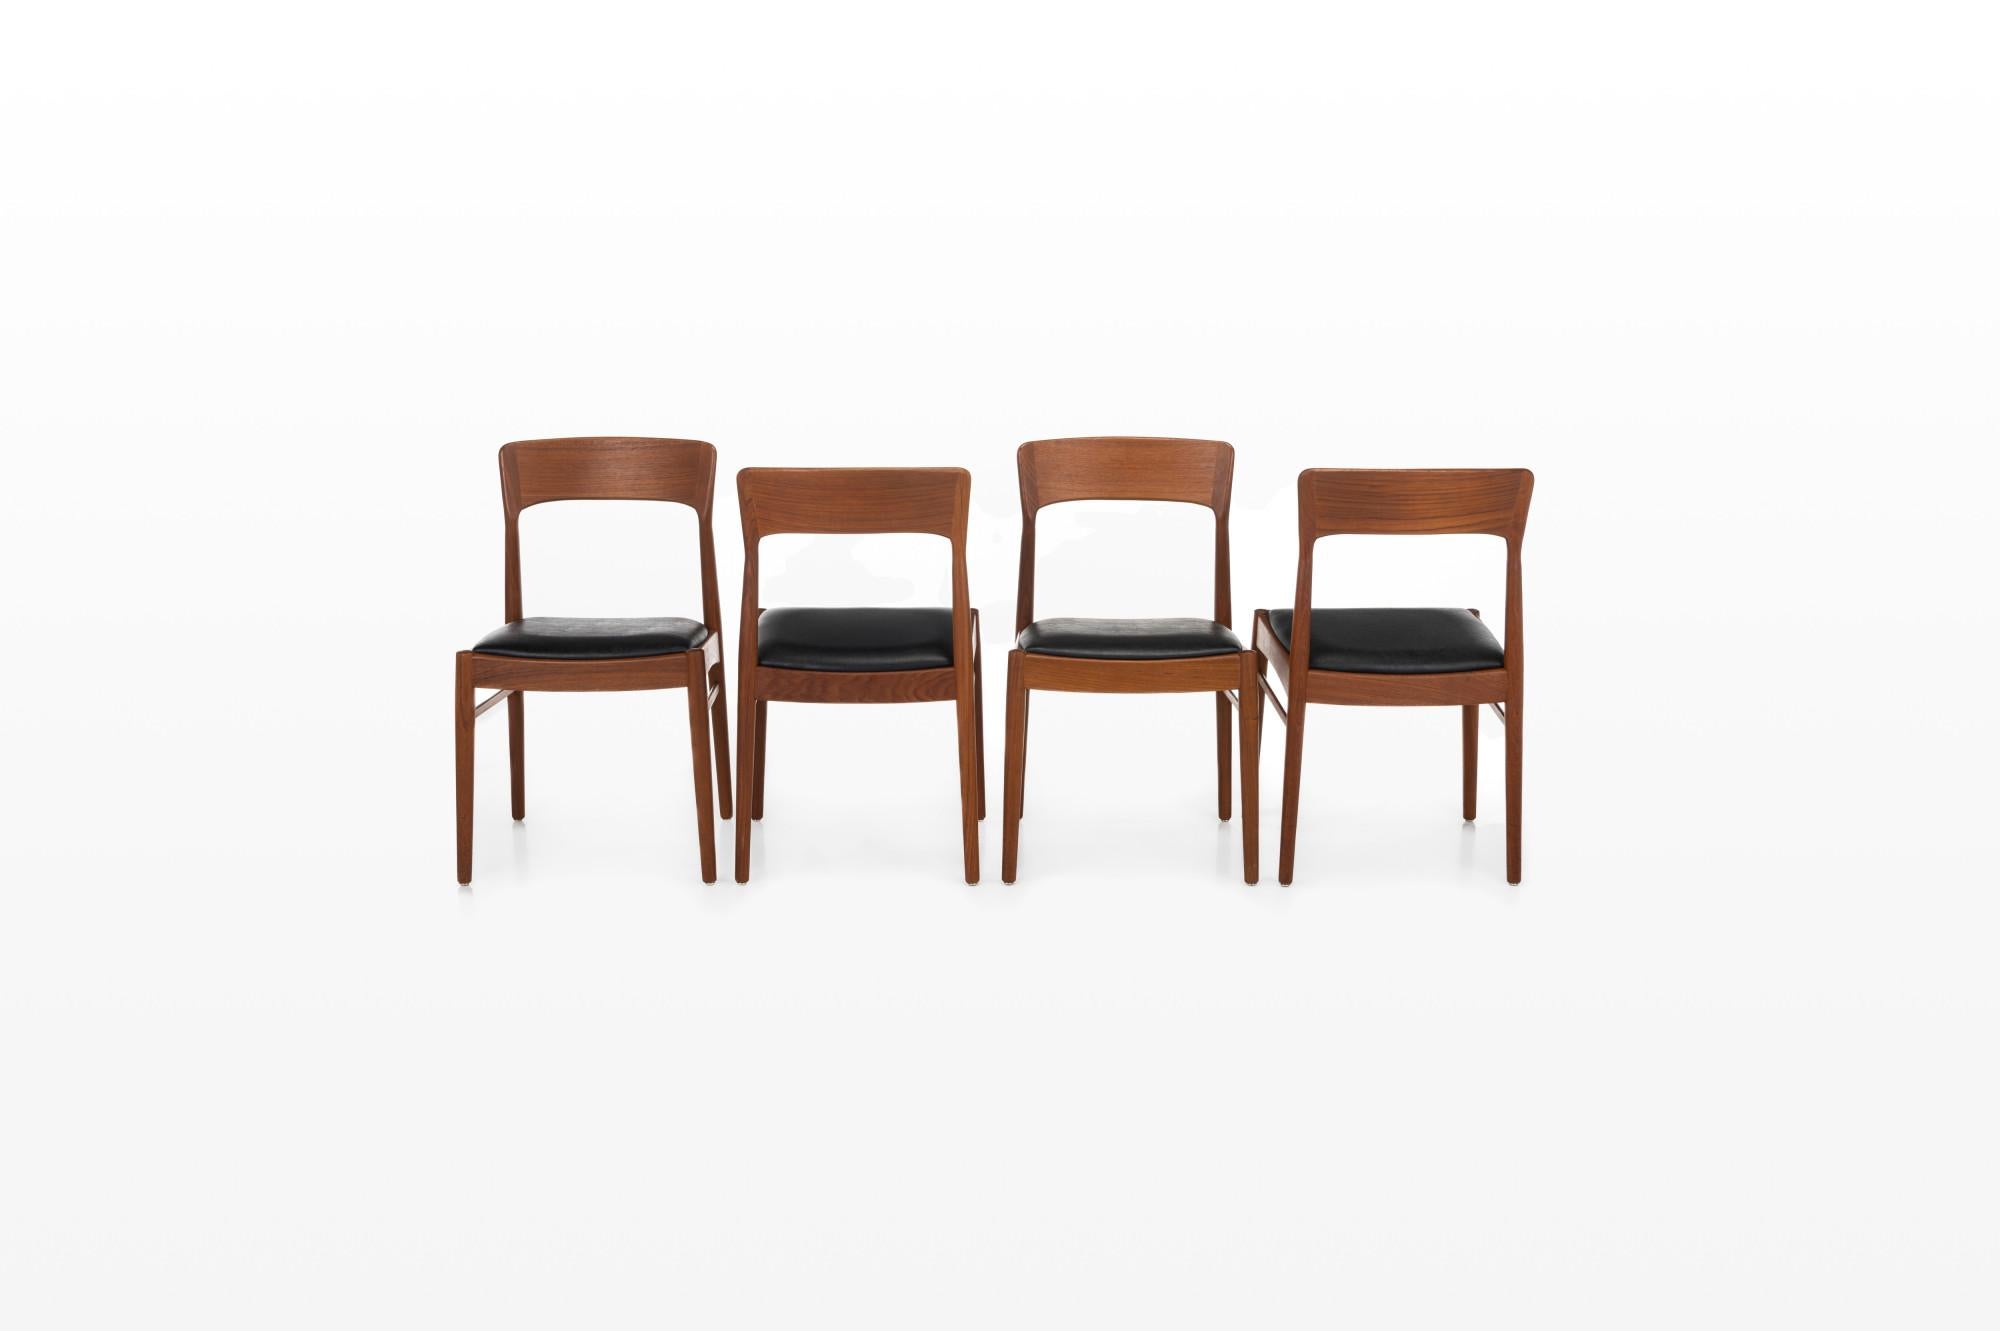 Set of four dining chairs in teak, designed by Henning Kjærnulf for Korup Stølefabrik in Denmark in the 1960s. The chairs still have the original black seats.